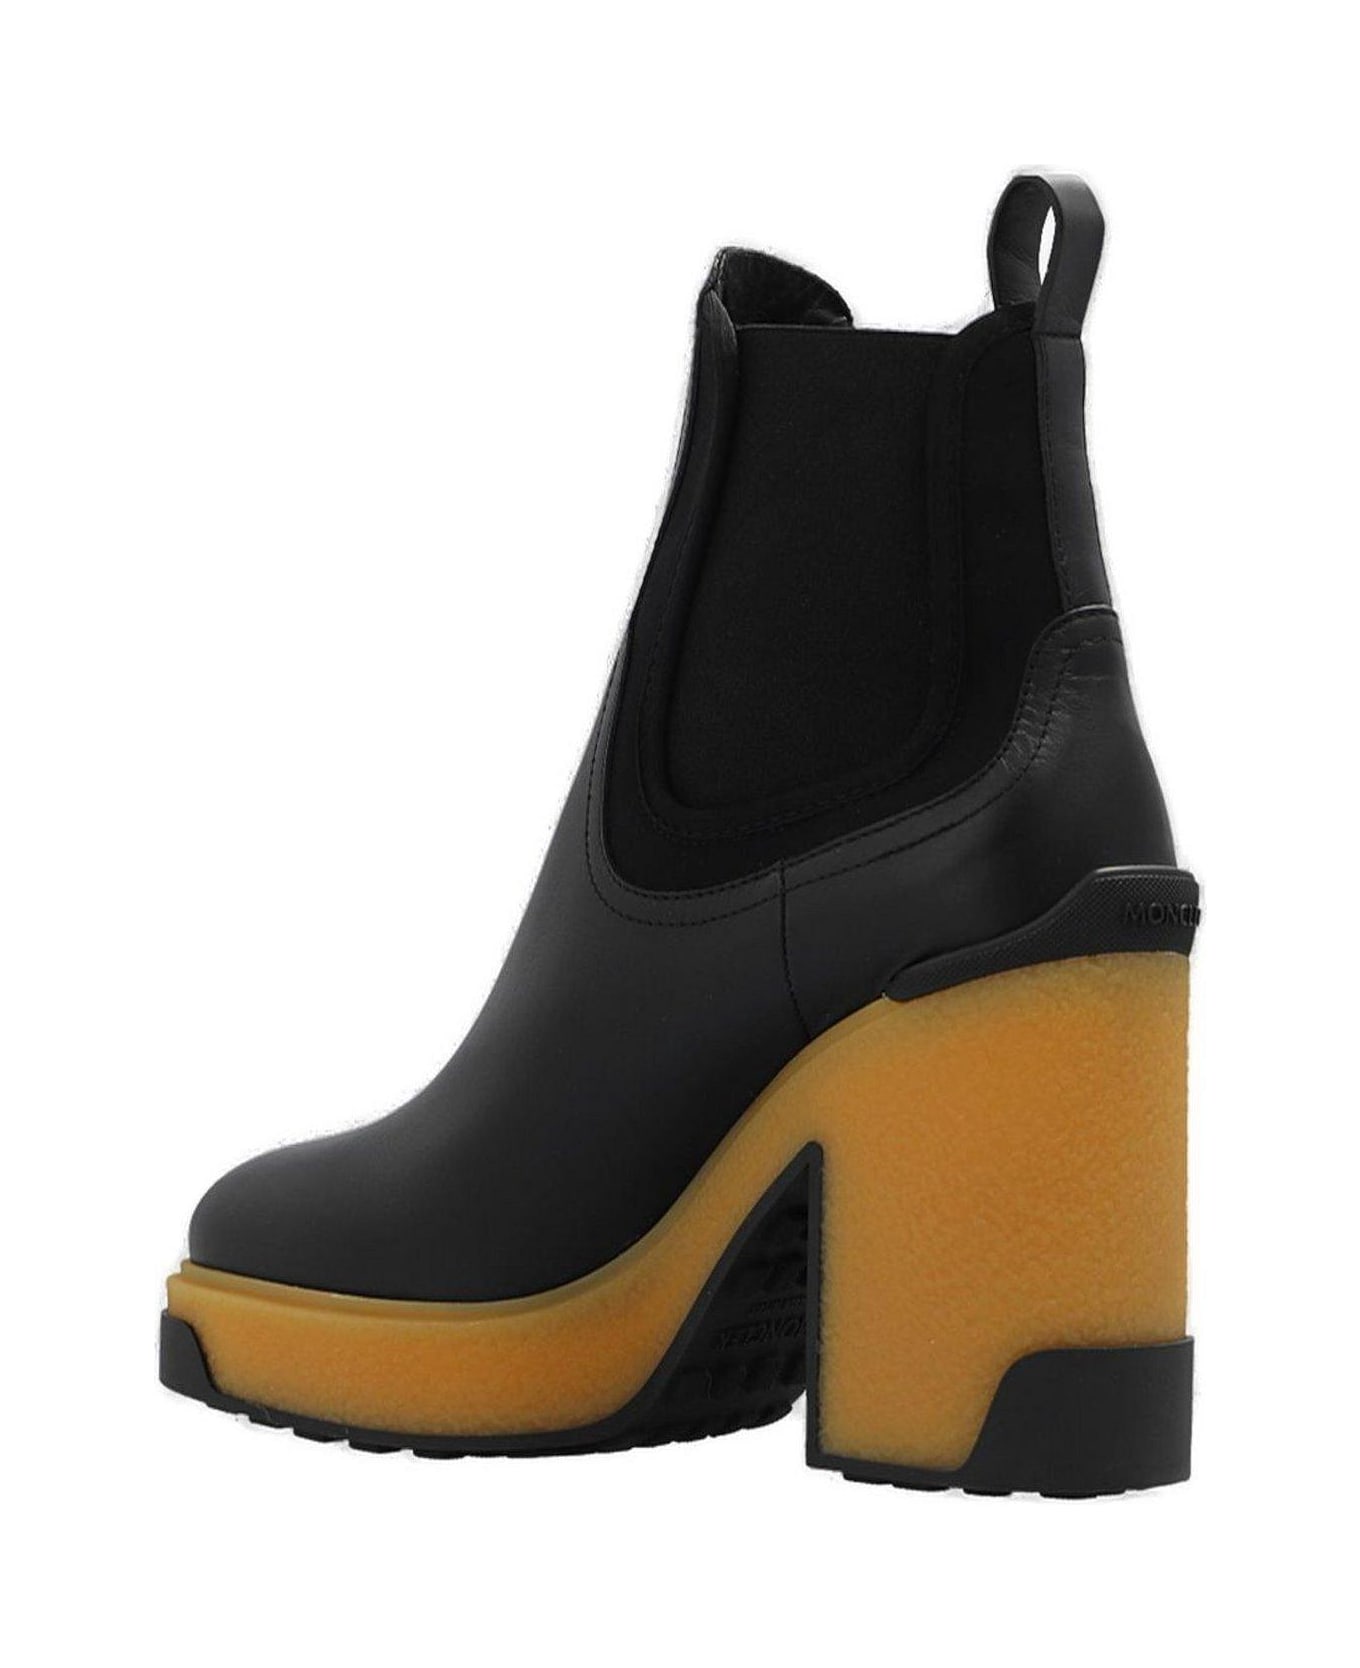 Moncler Isla Heeled Ankle Boots - Black ブーツ